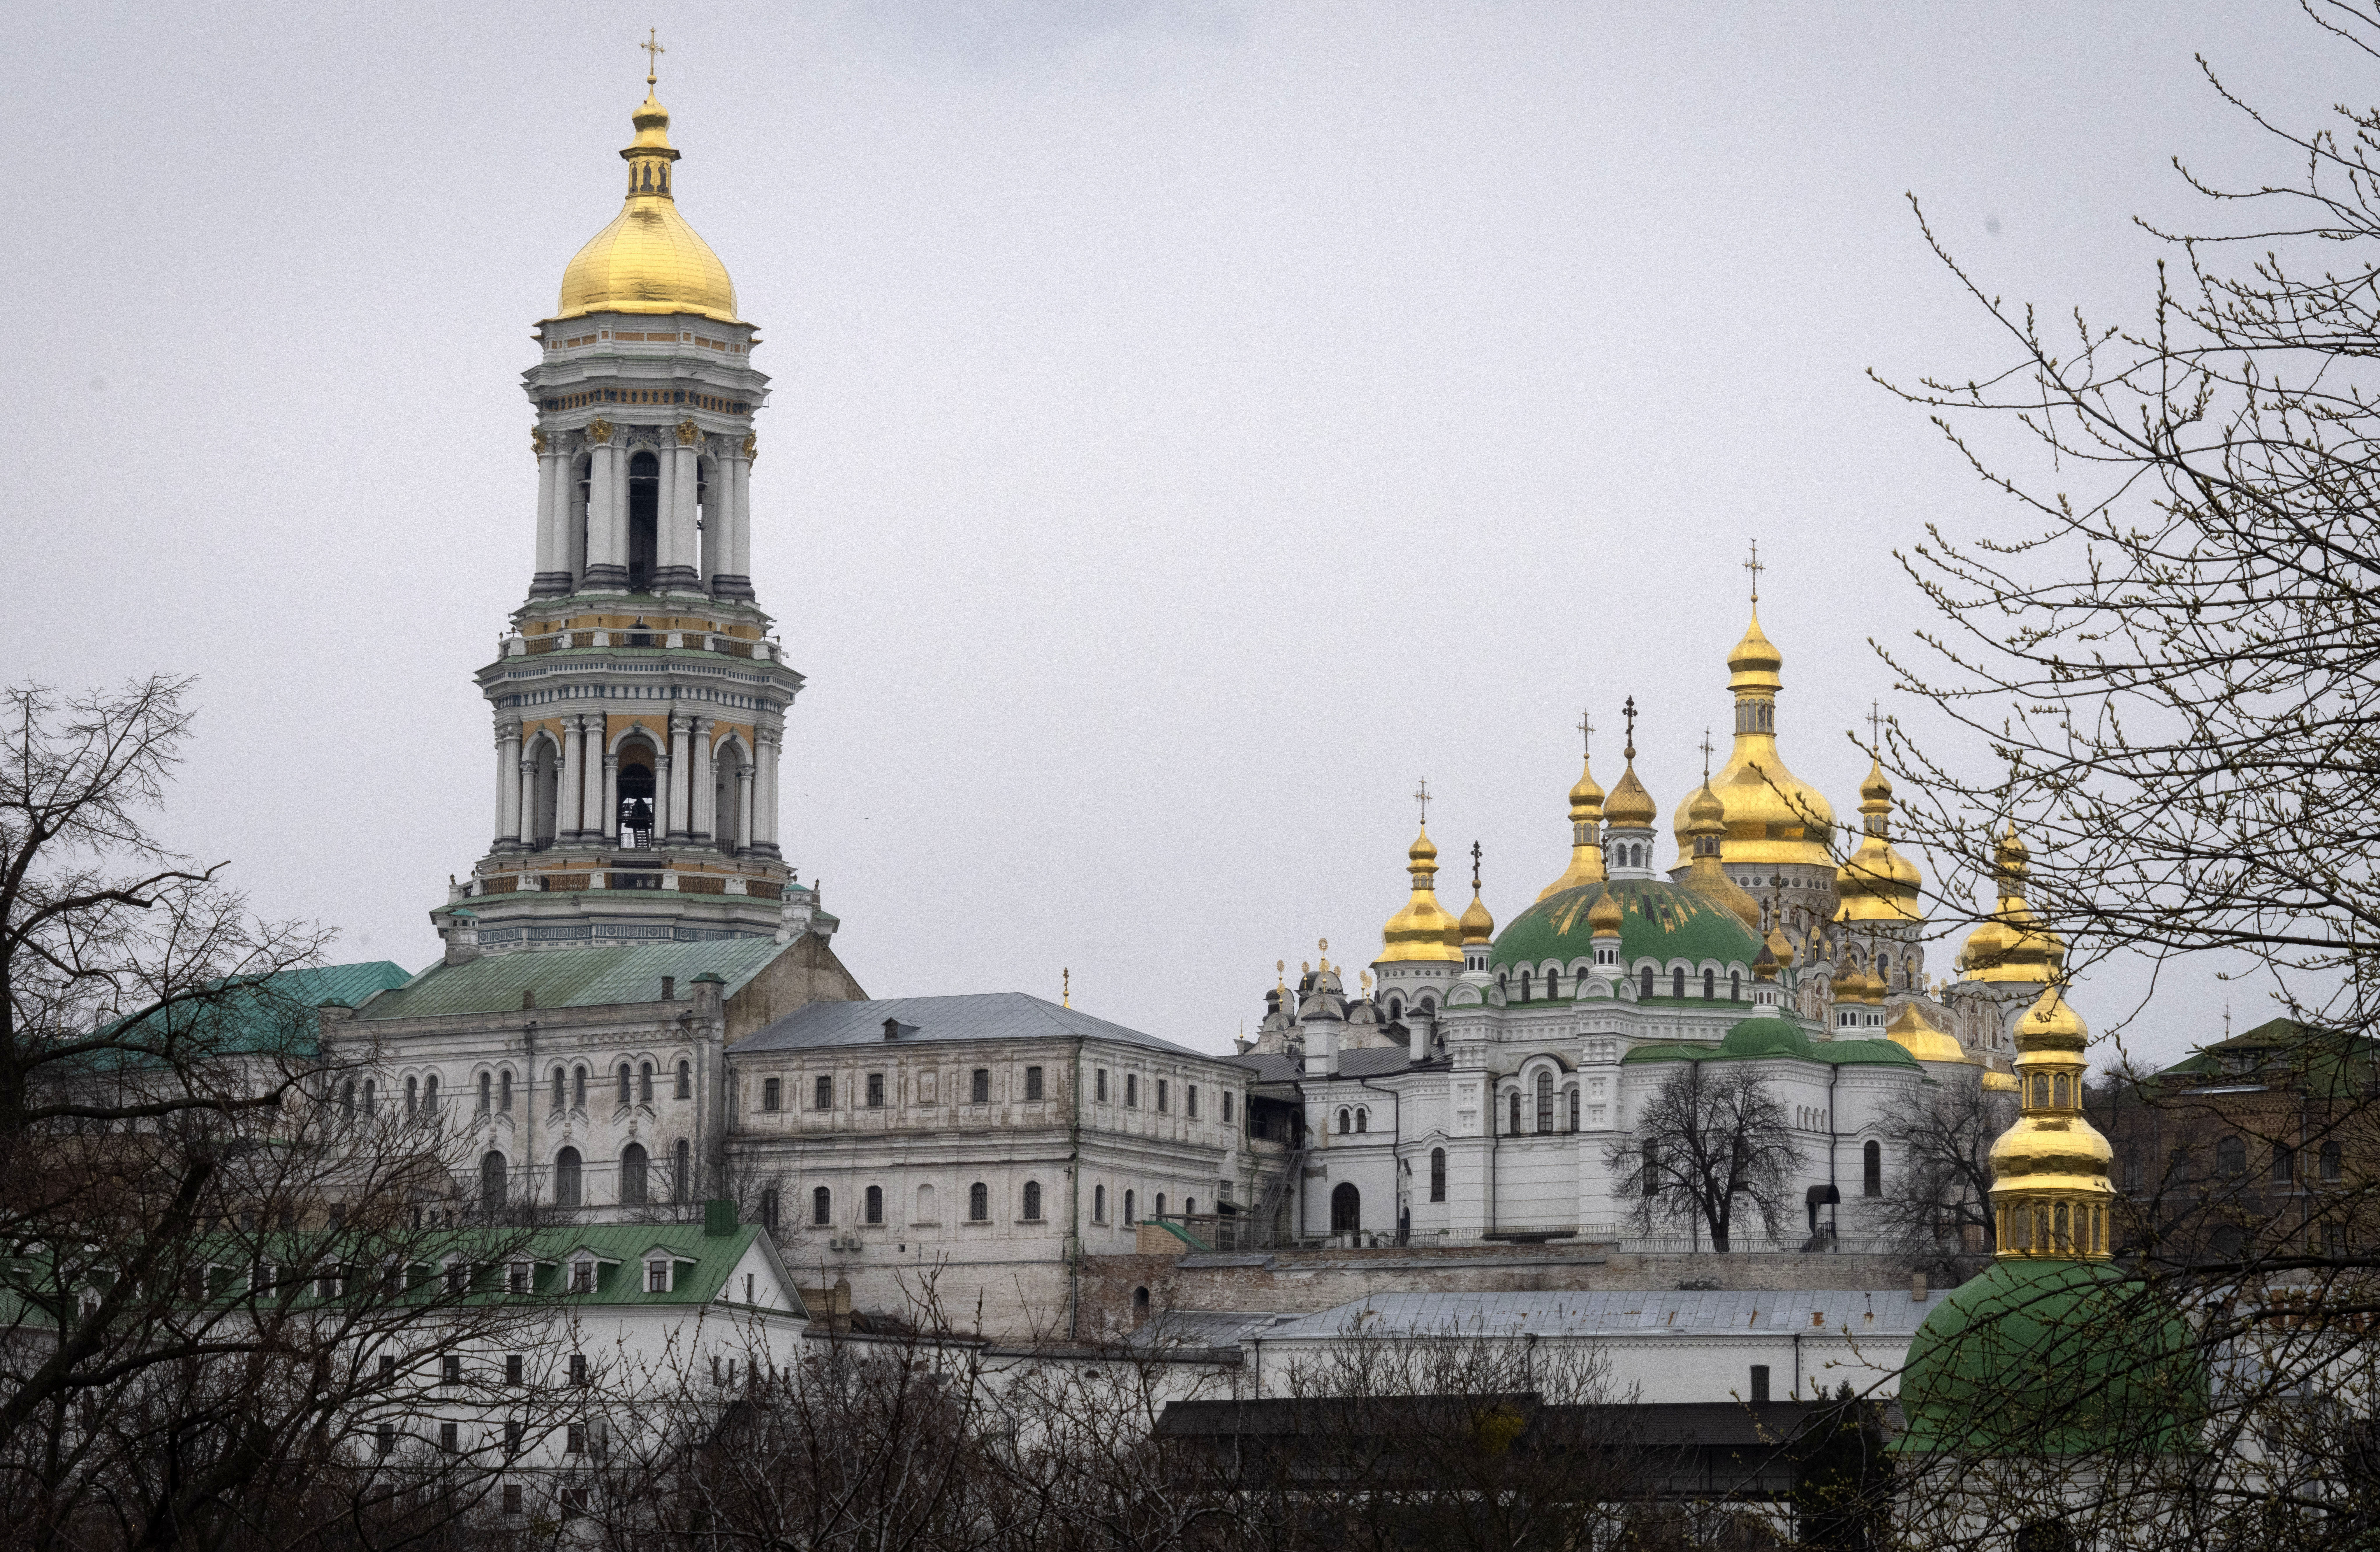 The Monastery of the Caves, also known as Kyiv-Pechersk Lavra, one of the holiest sites of Eastern Orthodox Christians, in Kyiv, Ukraine, March 23, 2023. Tensions are on the rise at a prominent Orthodox monastery in Kyiv where the monks are facing eviction later this month. The Ukrainian government accuses the monks of links to Moscow, even though they claim to have severed ties with the Russian Orthodox Church following Russia's full-scale of invasion of Ukraine. (AP Photo/Efrem Lukatsky)